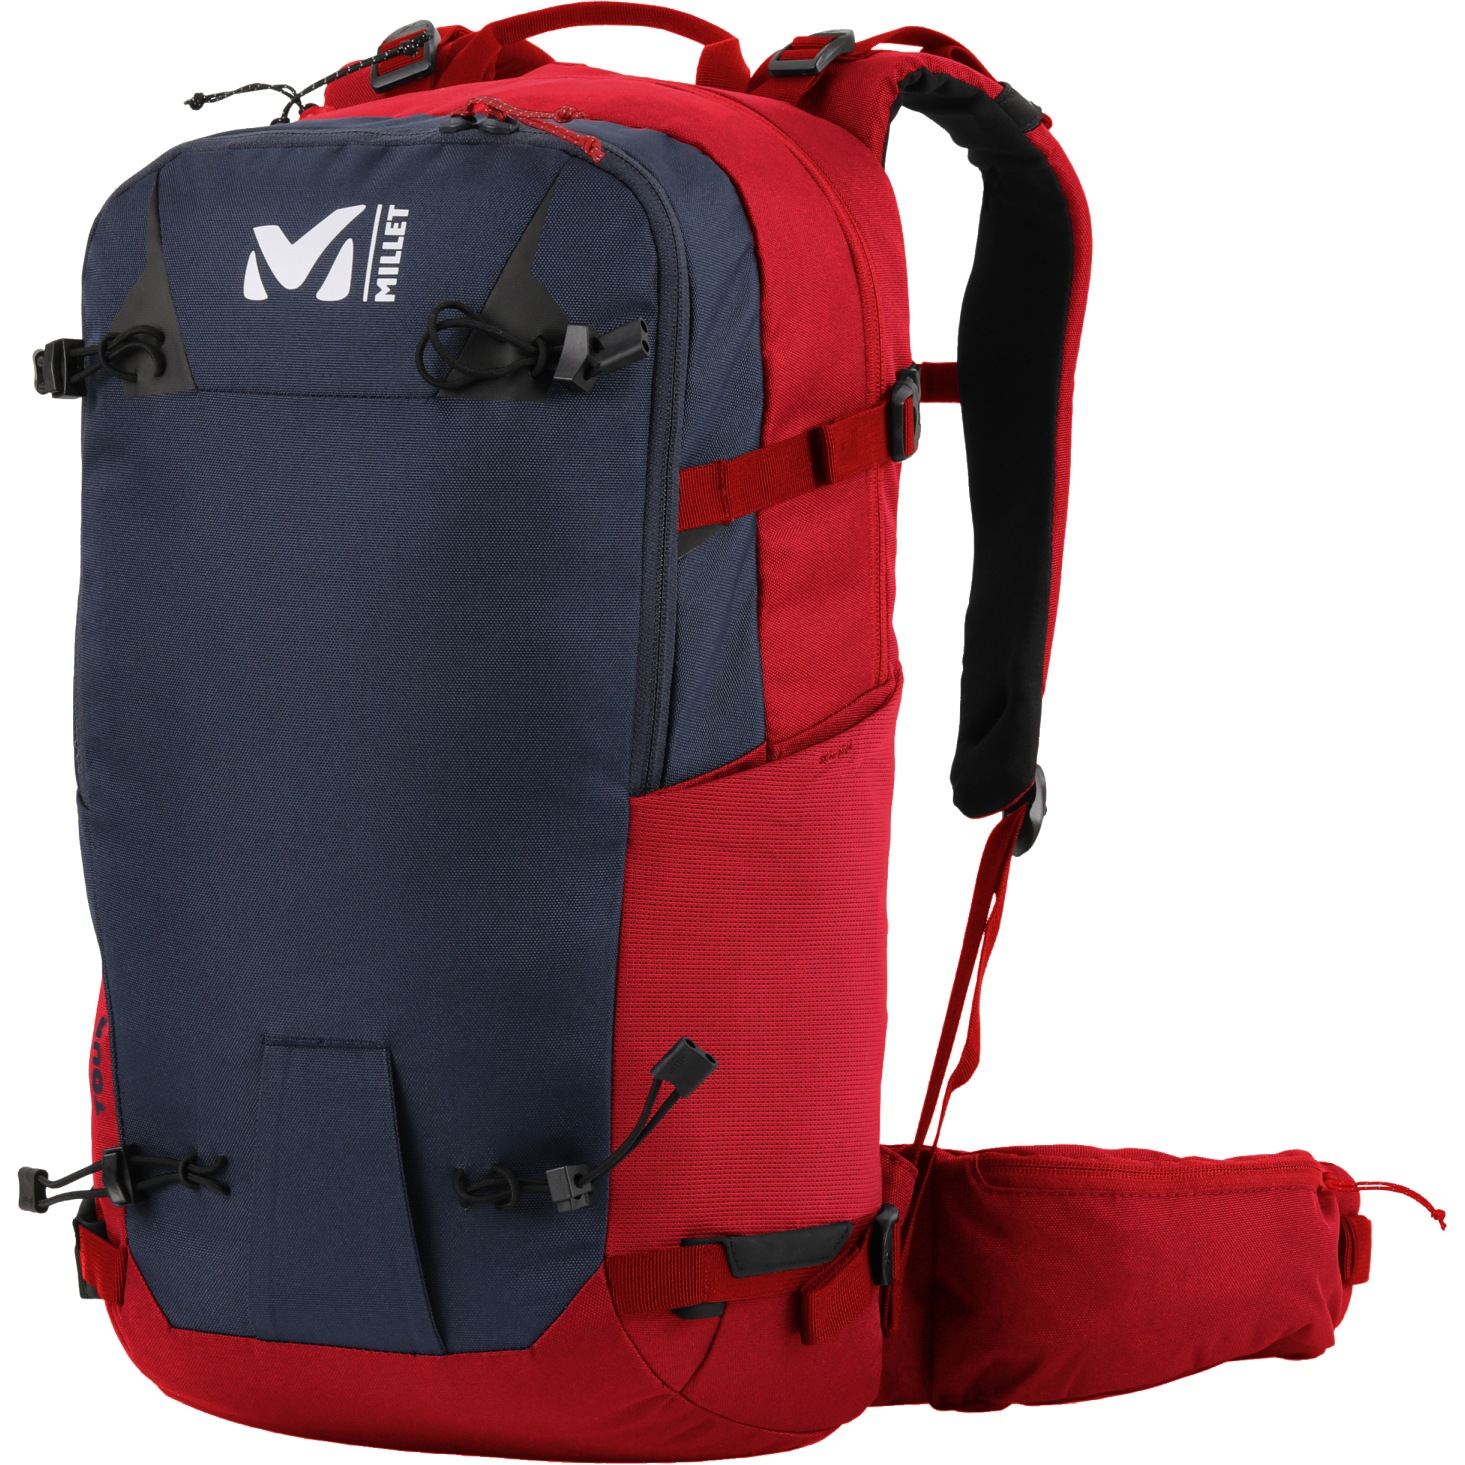 Picture of Millet Tour 25 Ski Backpack - Red/Saphir